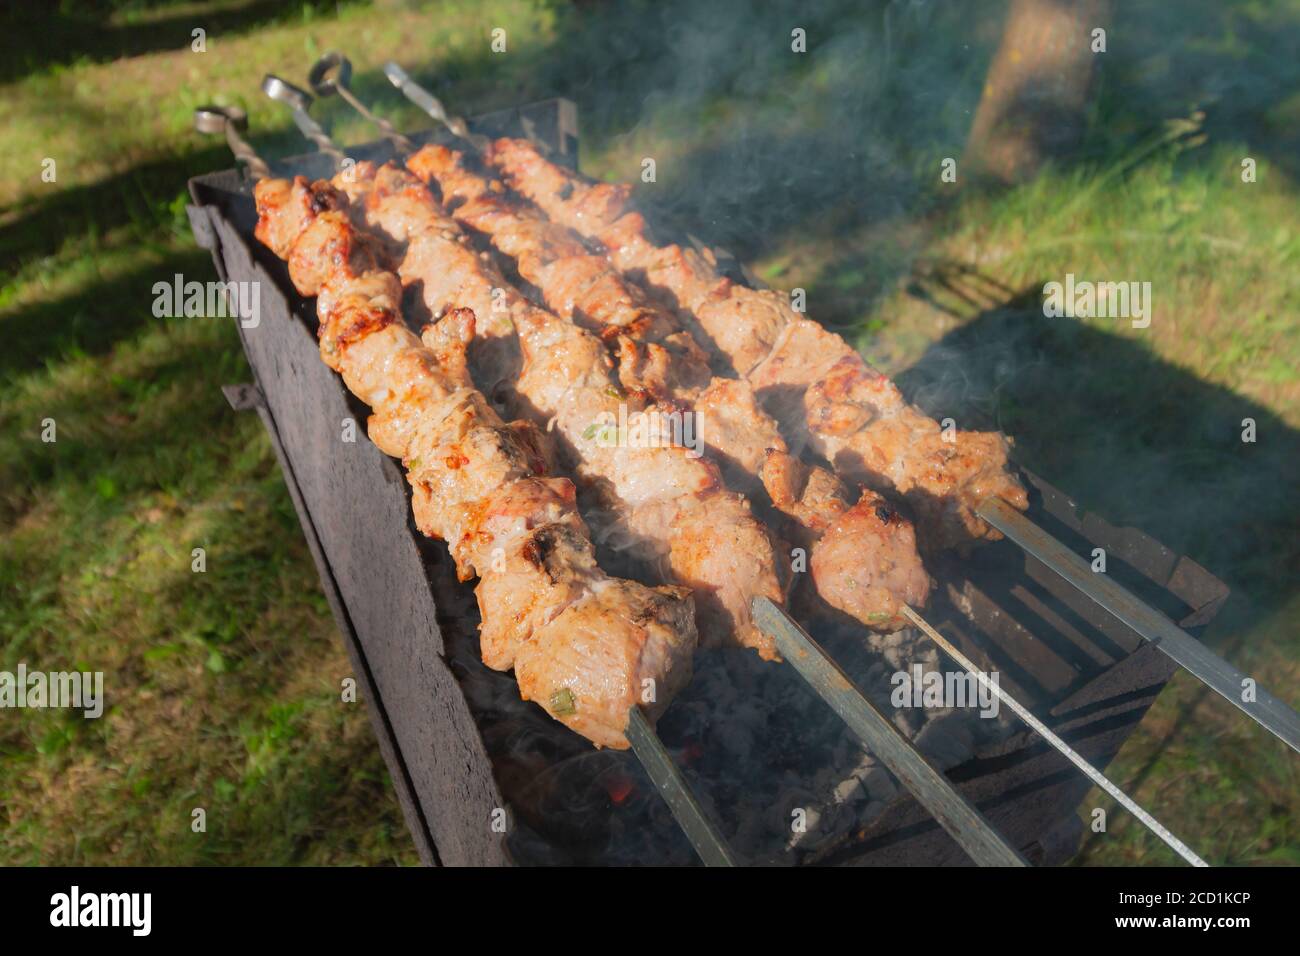 Shashlik or shashlyk preparing on a barbecue grill over charcoal Stock Photo